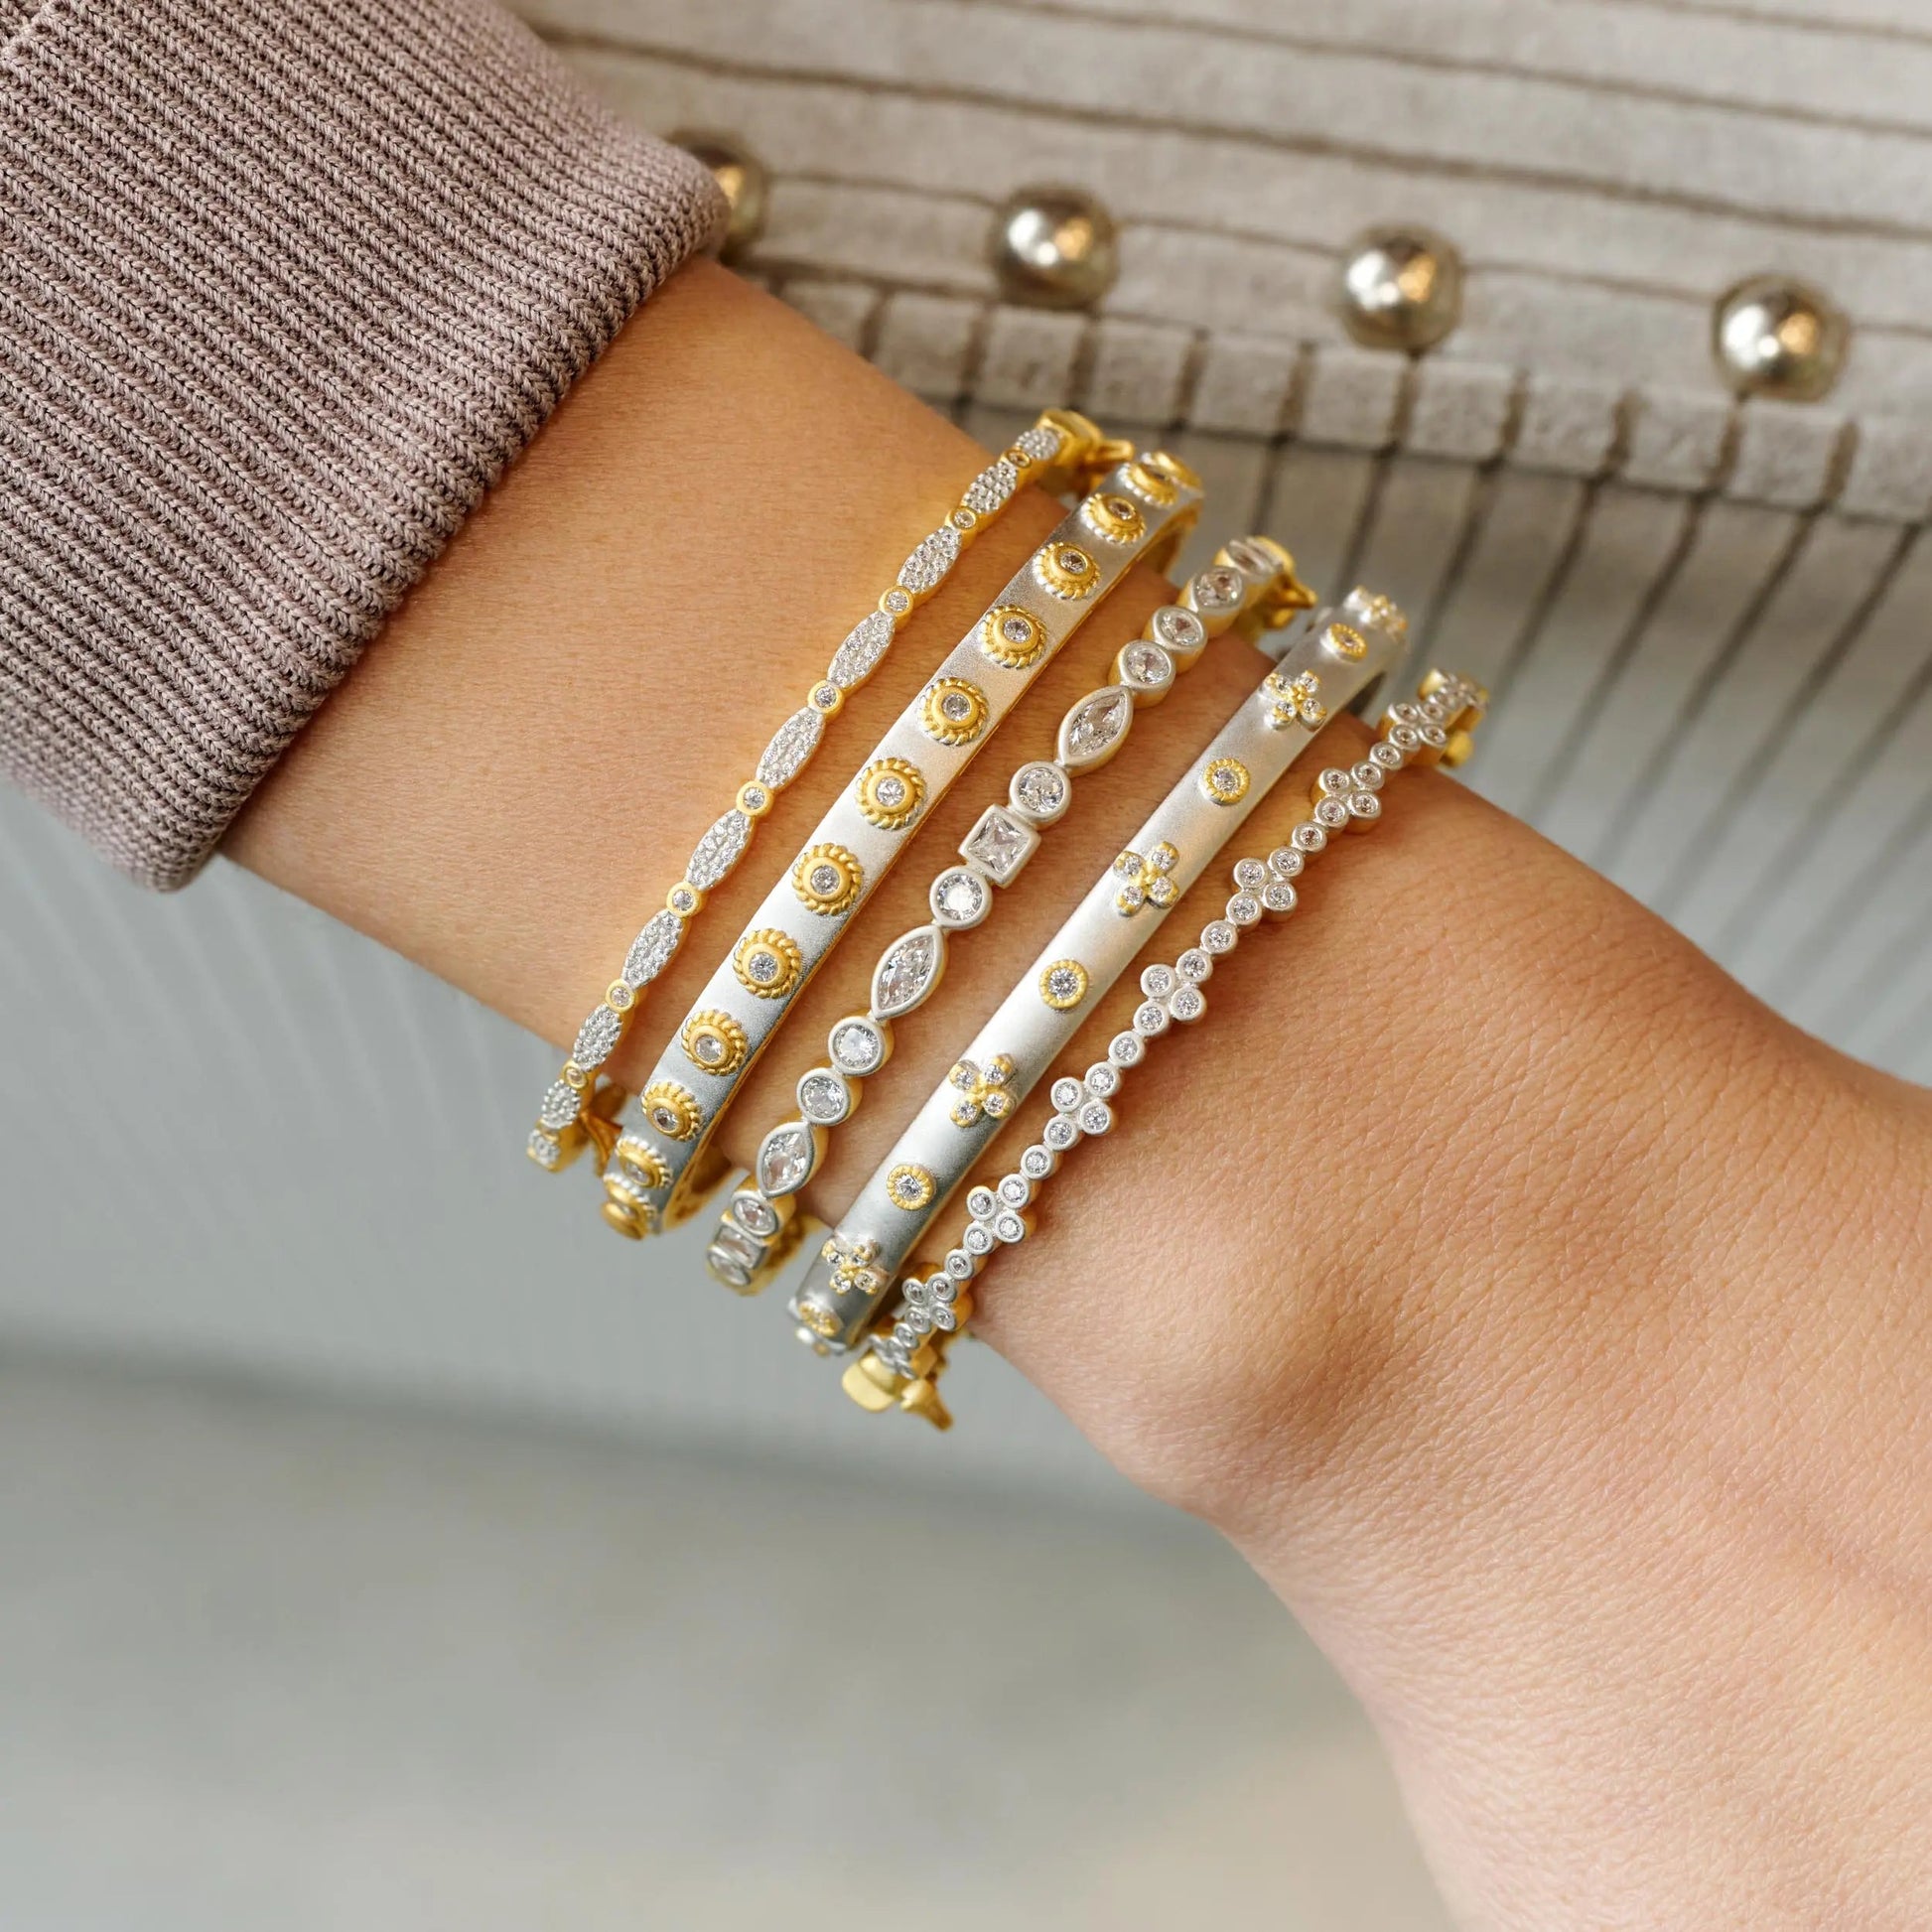  Pops of Pavé Stack Shop the Look SHOP THE LOOK